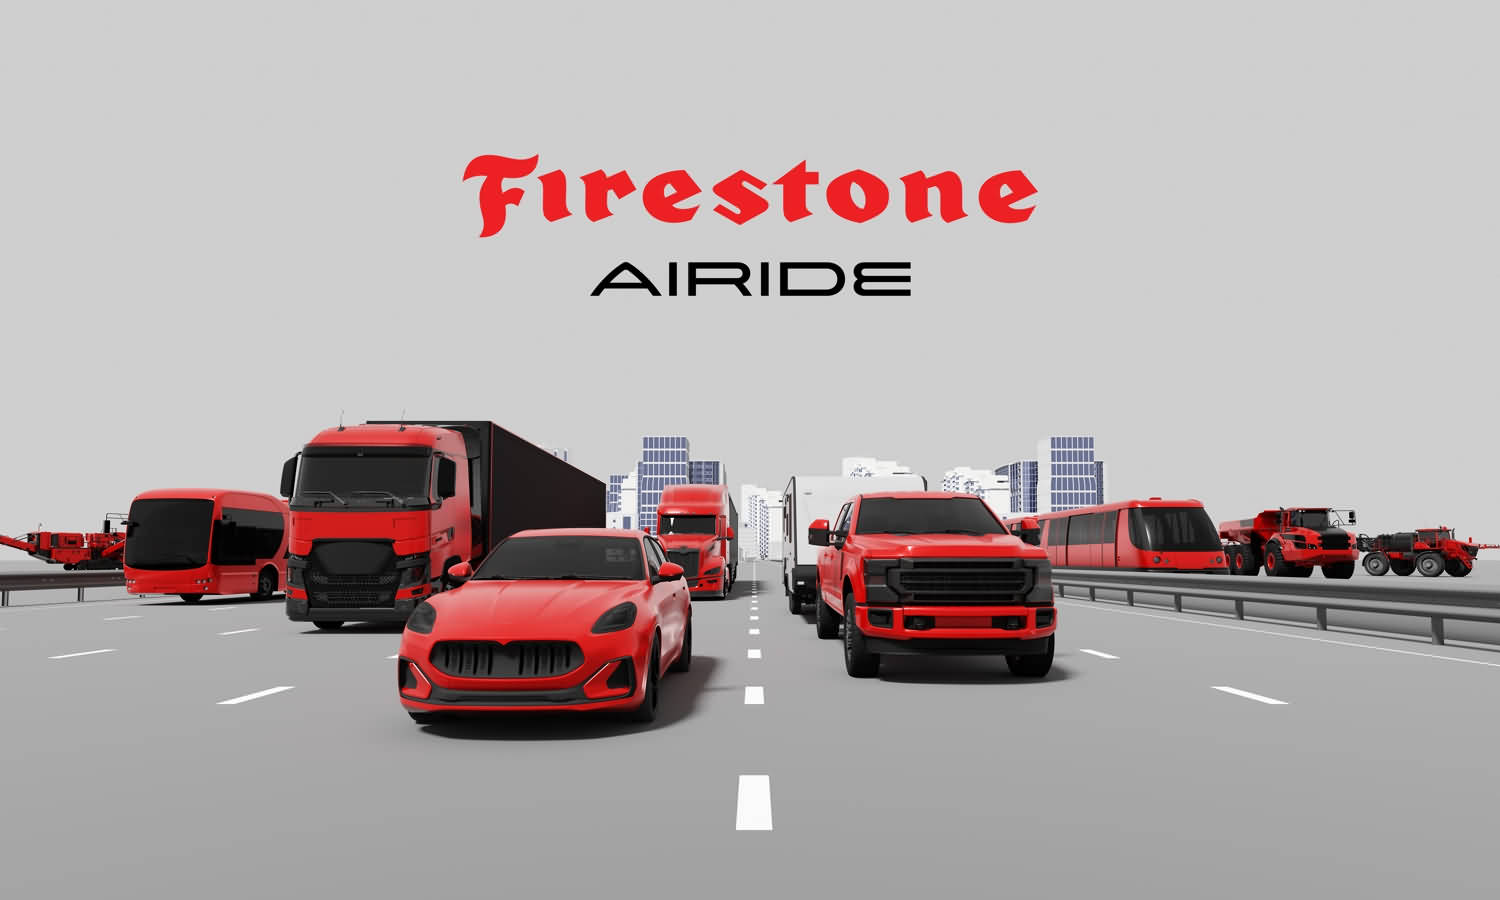 Firestone Industrial Products Company to Rebrand as Firestone Airide